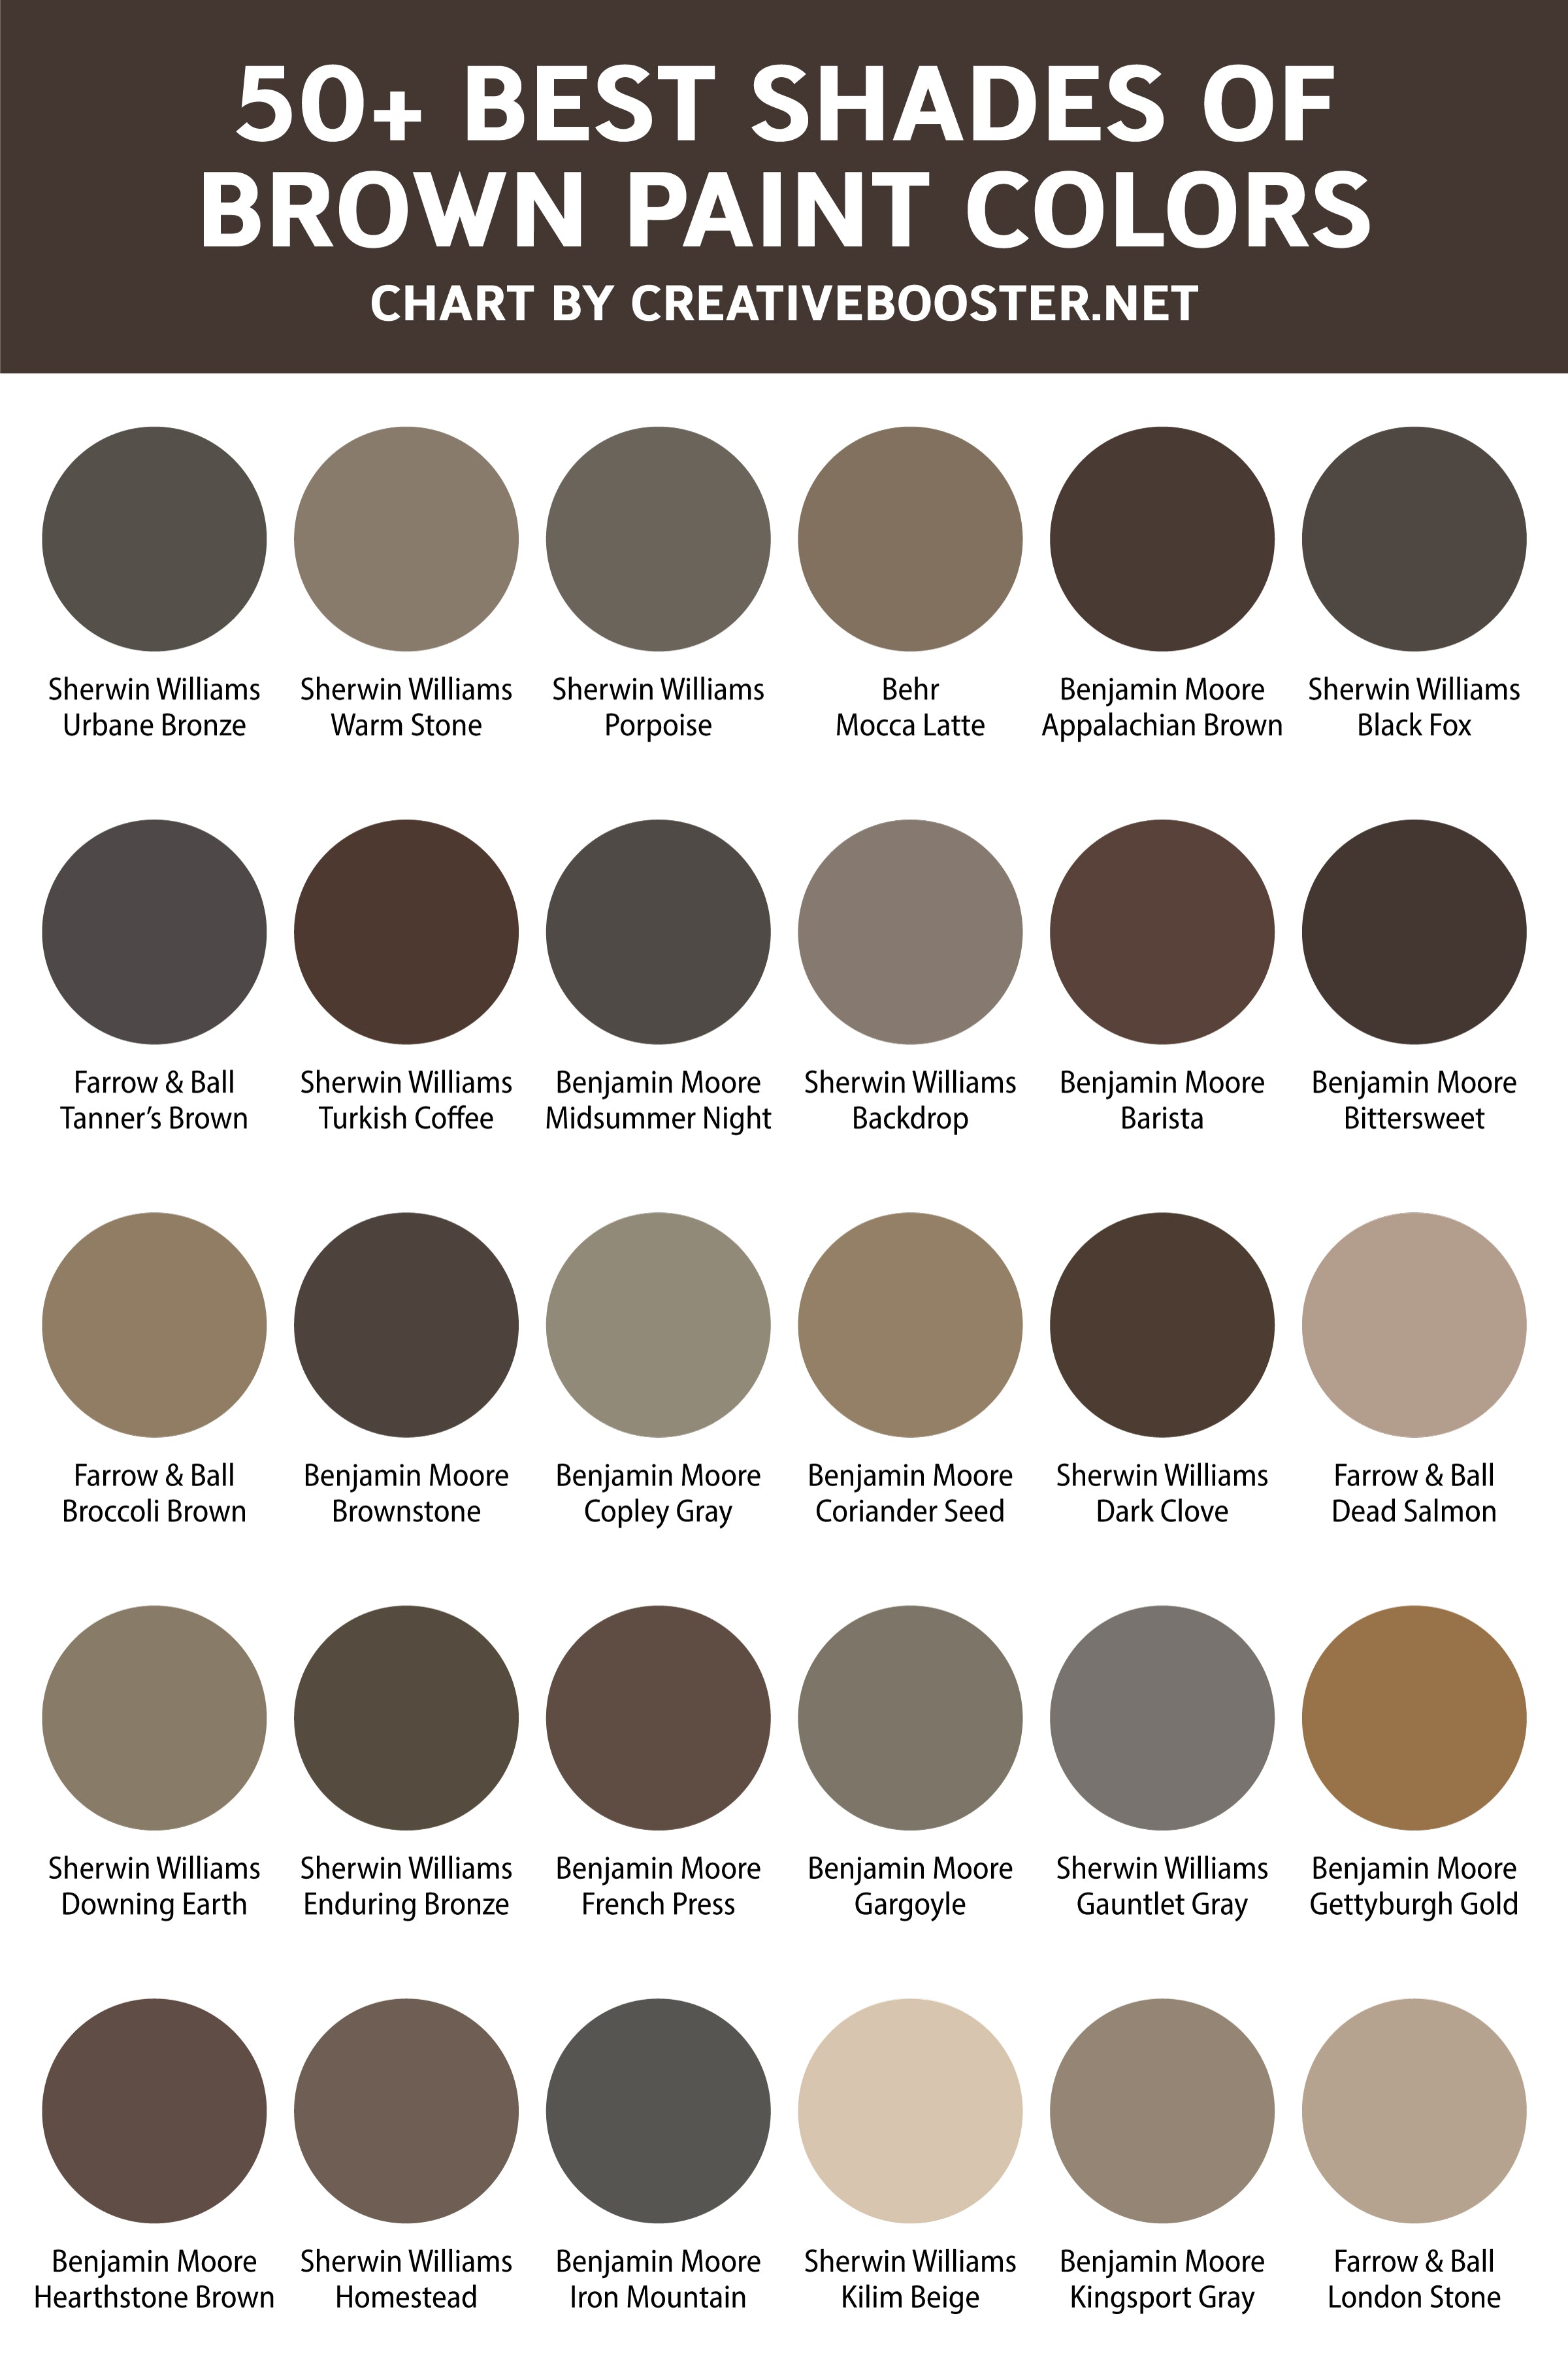 Shades-of-Brown-Paint-Colors-chart-with-names-and-brands-sherwin-williams-benjamin-moore-pinterest-tall